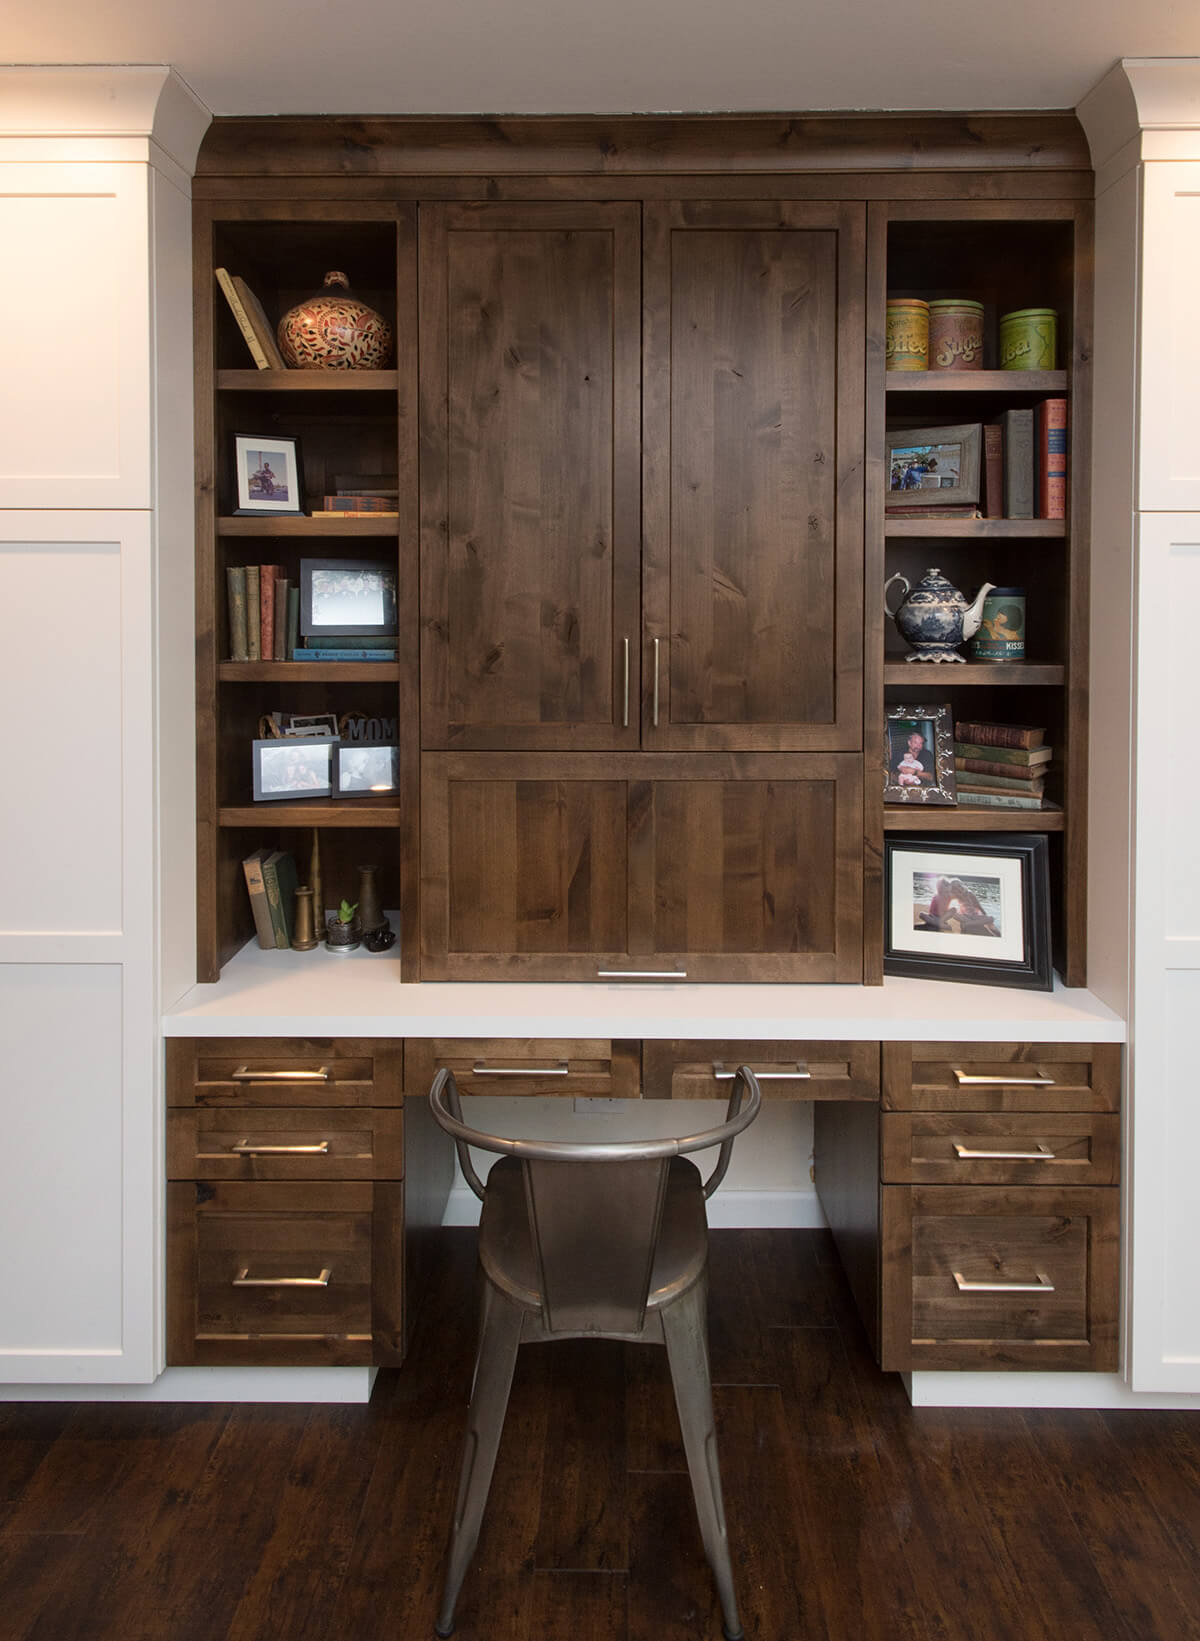 Dura Supreme Cabinetry kitchen and home office desk designed by Erin Havard of Modern Mountain Cabinetry & Co., California. Photography by Chantel Elder of Eleakis & Elder Photography.